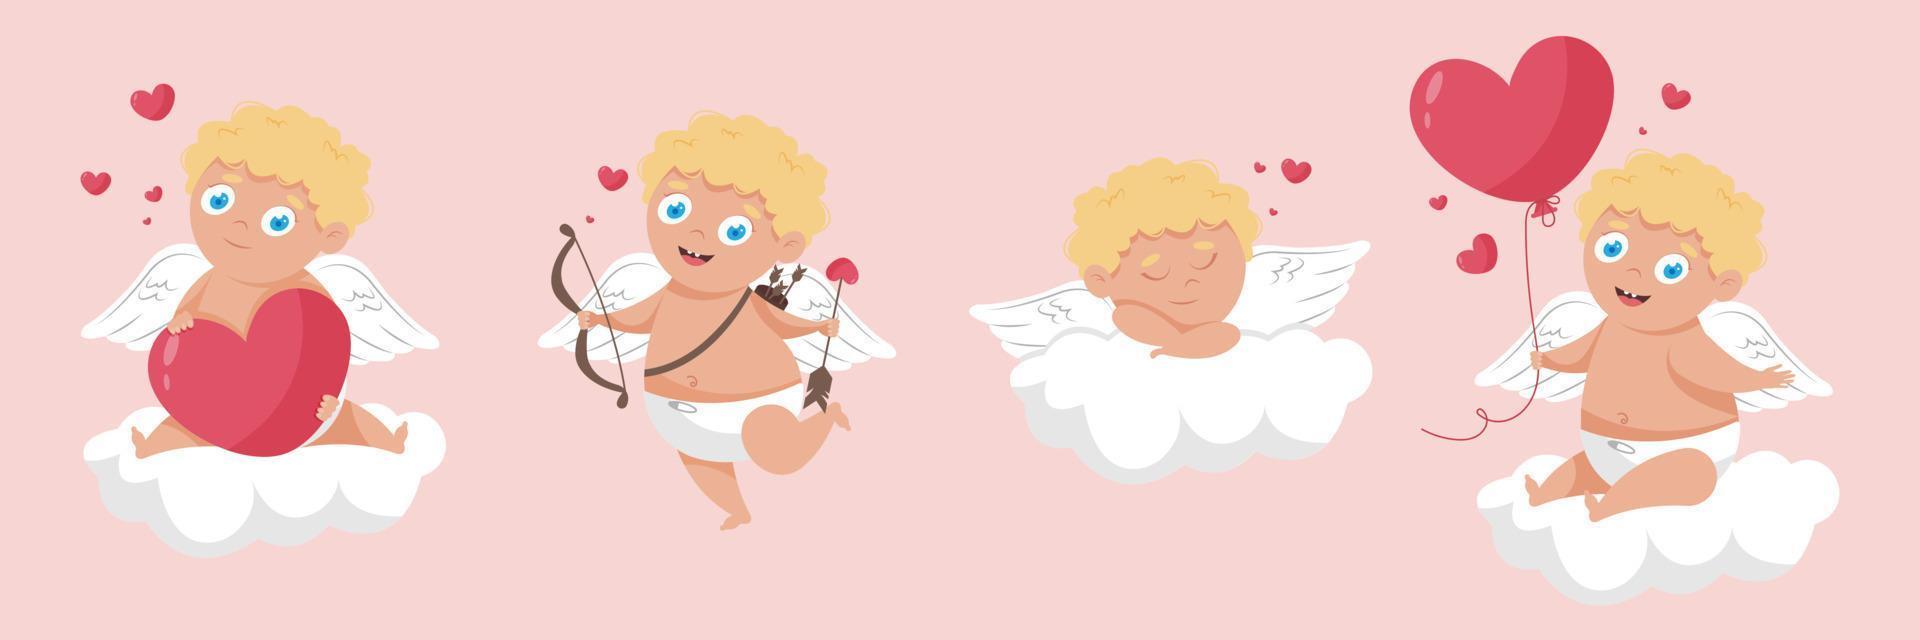 Happy Saint Valentine's Day poster with cute curly blonde hair angel cupid with wings on a cloud, holding balloon heart, with bow and arrows or just sleeping on a cloud. Vector illustration.